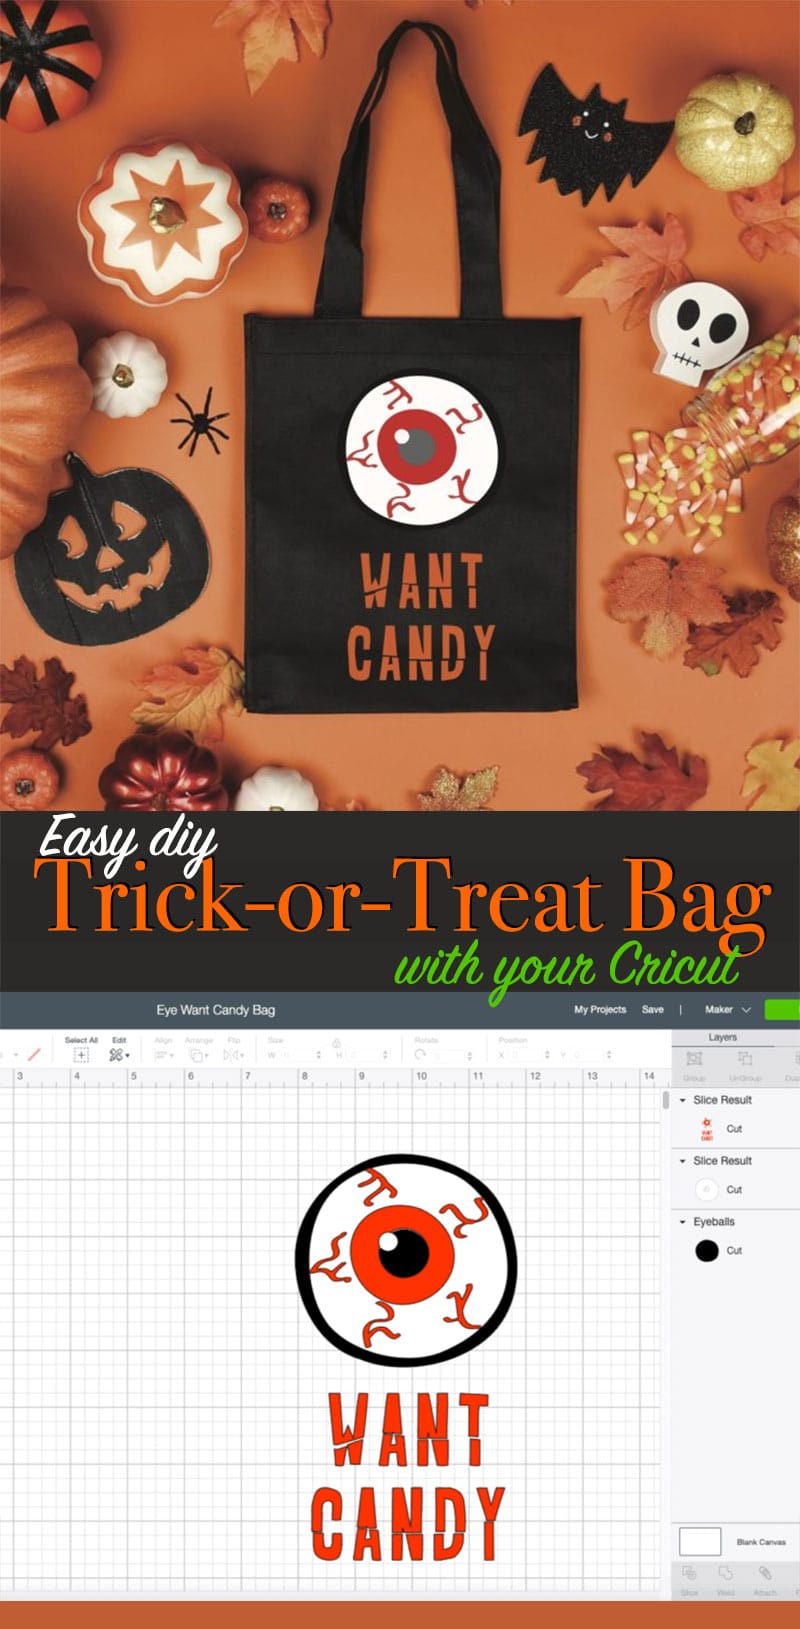 Make your own Trick-or-Treat bag in minutes with Cricut